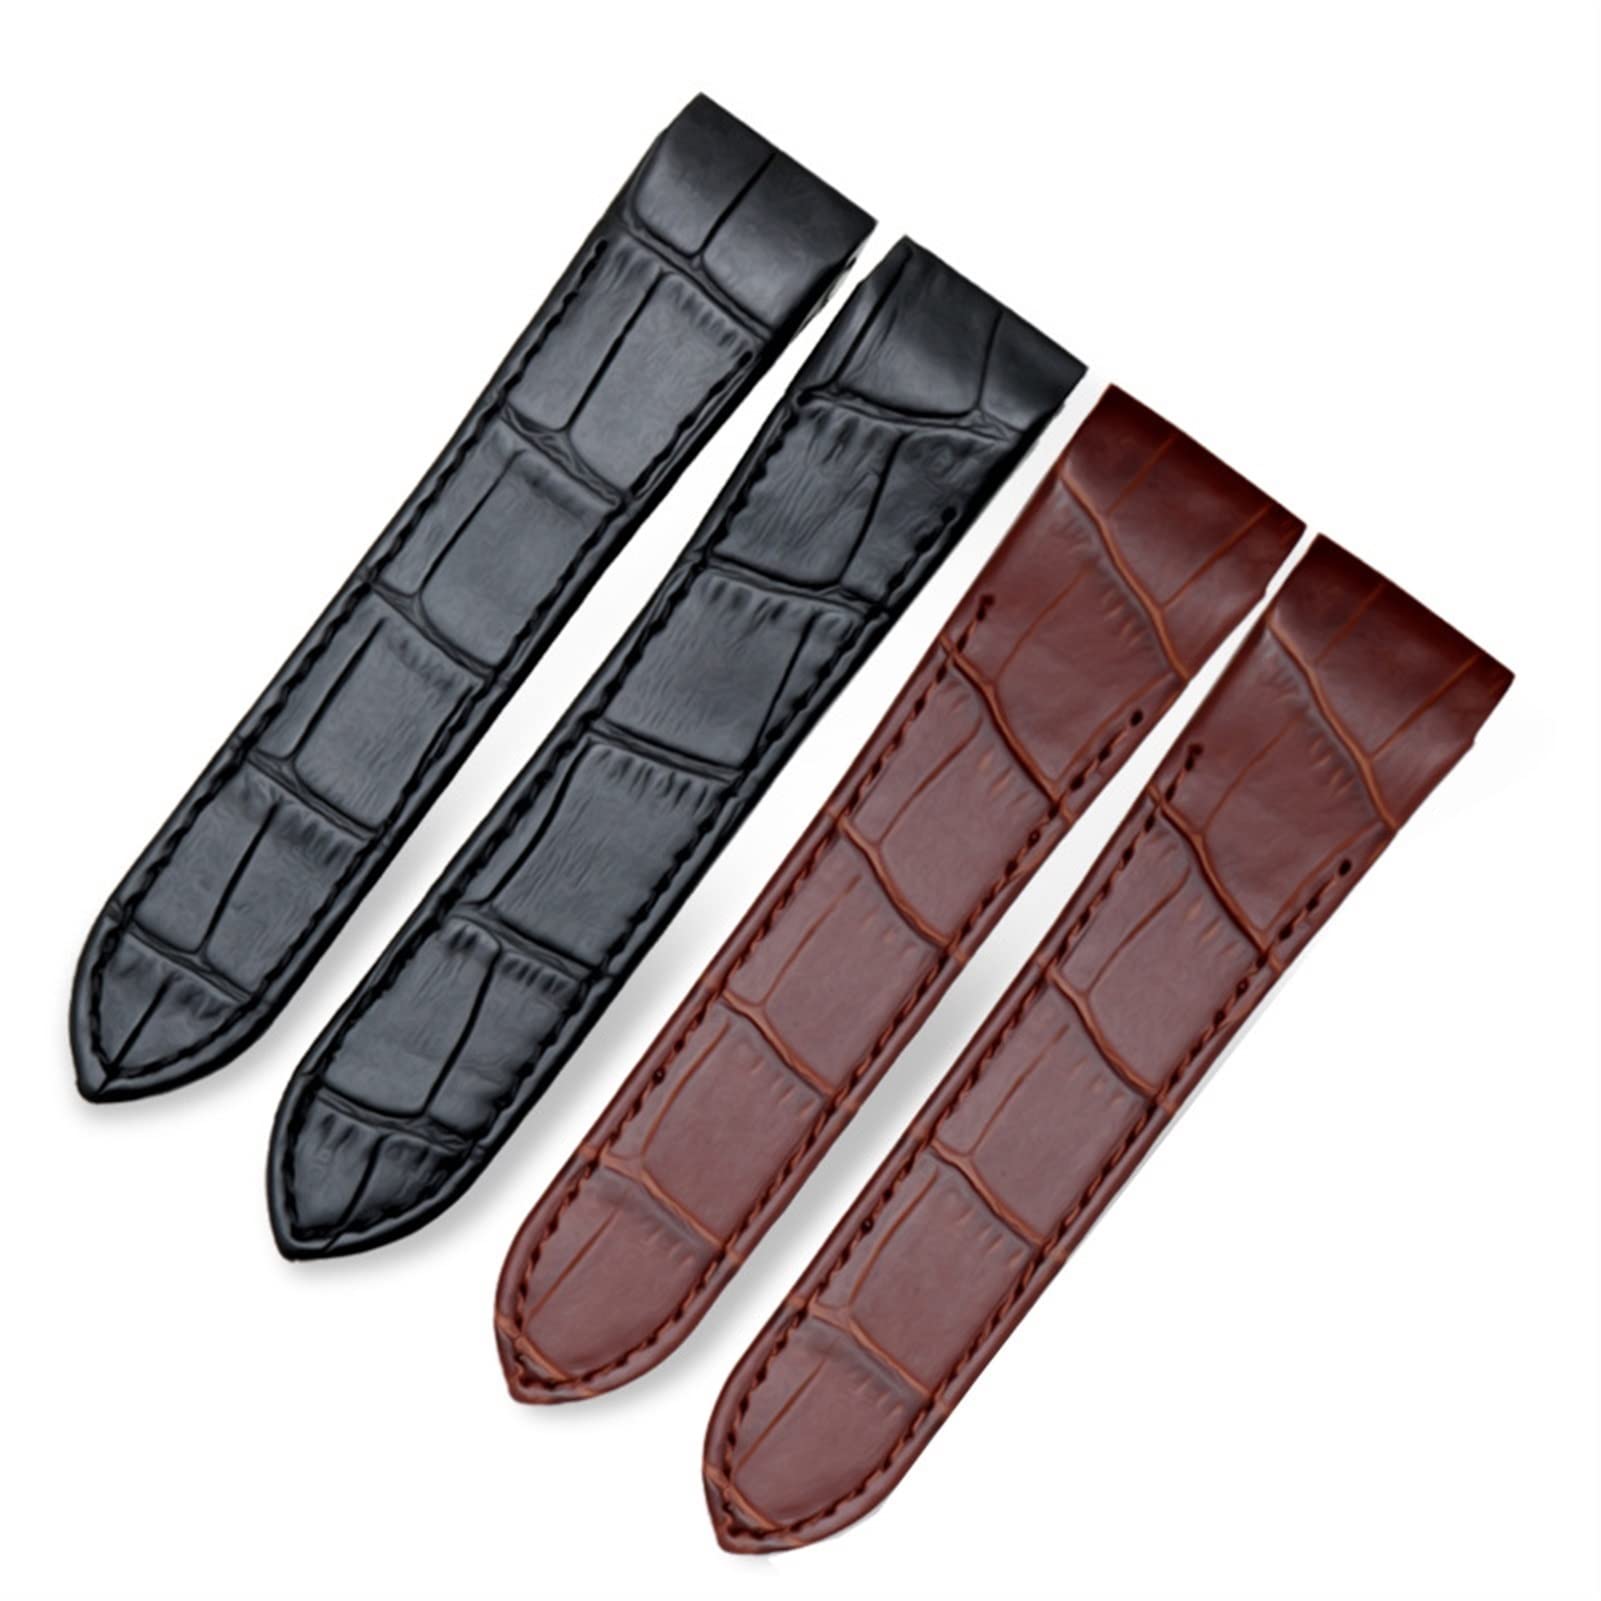 SKM Genuine Leather Watch Strap for Cartier Santos Santos 100 Men and Women Leather Watchband 20mm 23mm (Color : Brown-Silver, Size : 23mm)